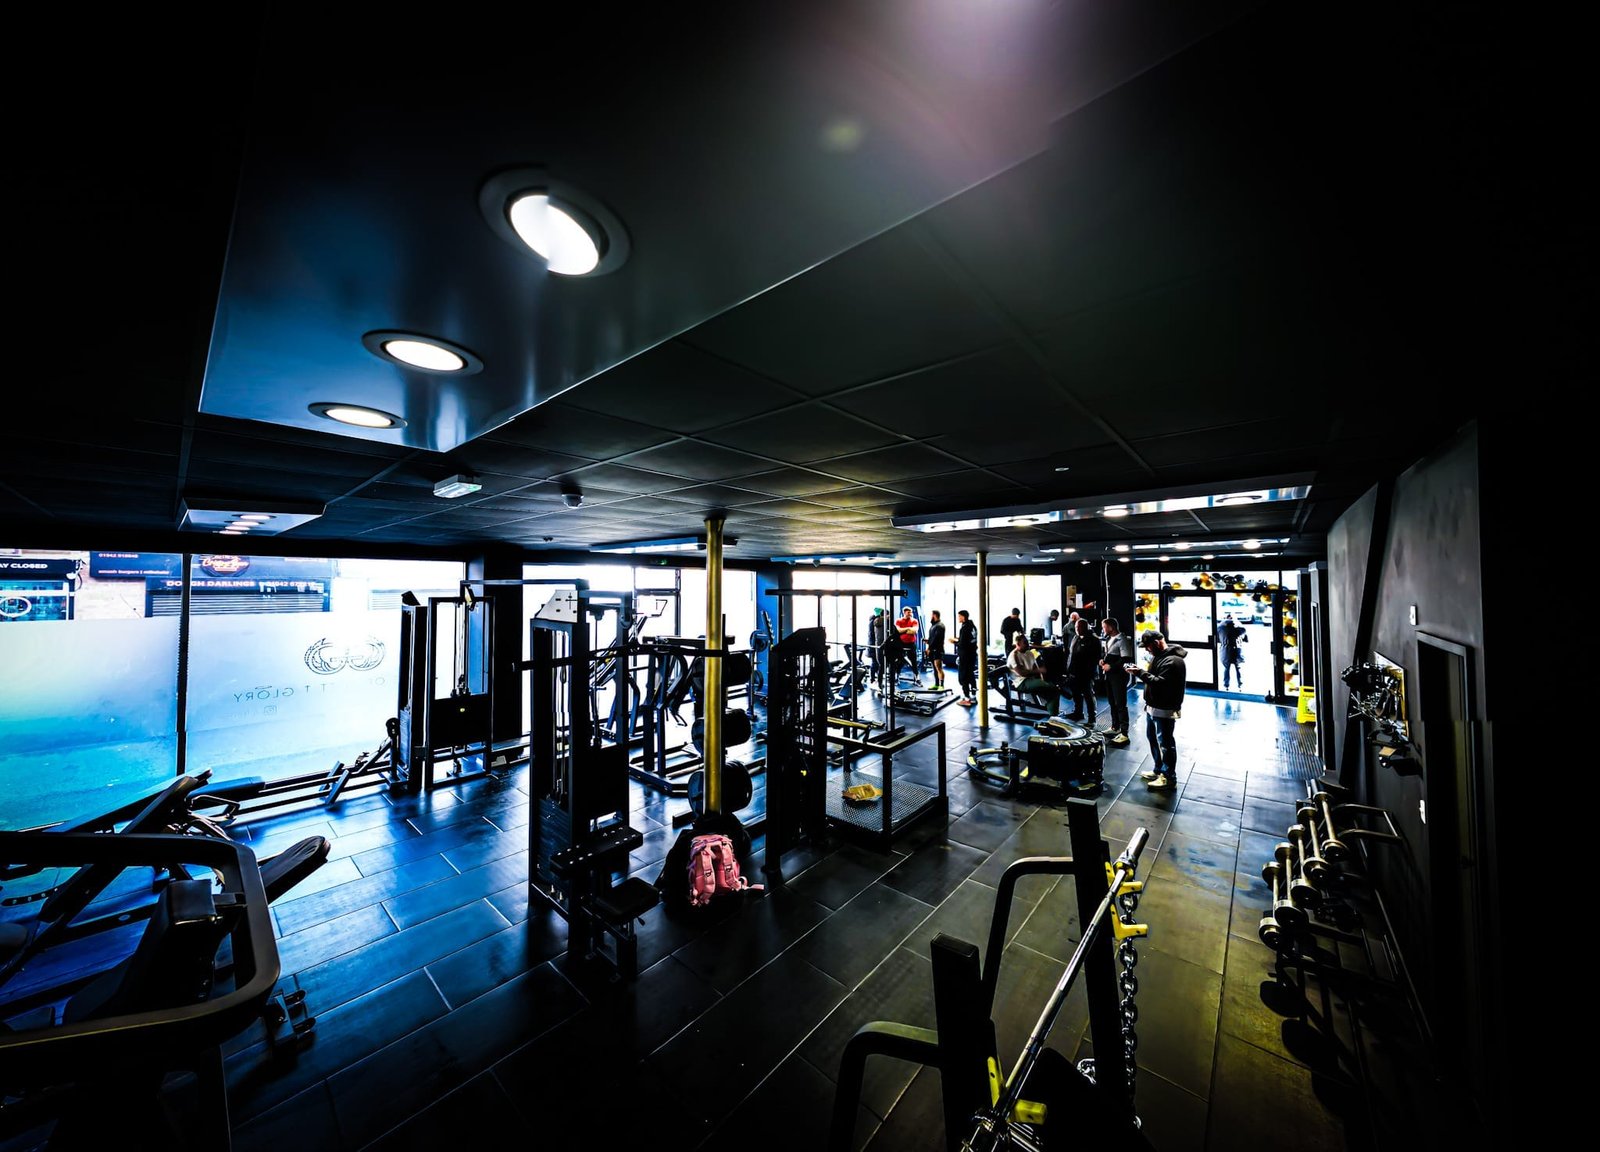 best gym in leigh - free day pass